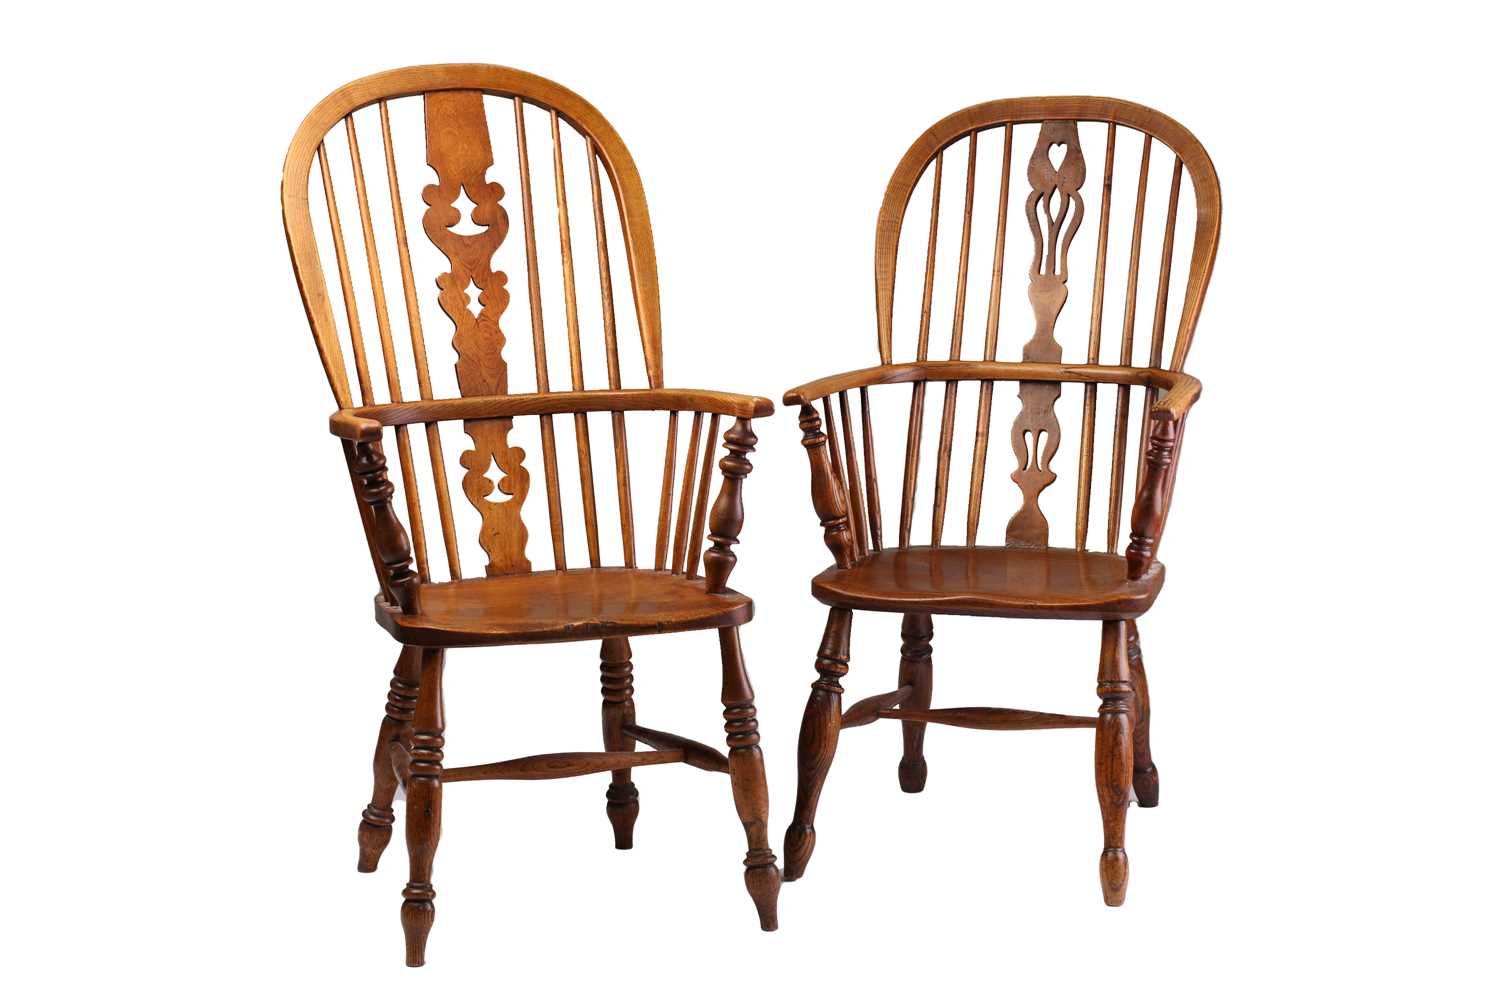 A 19th century Windsor high hoop back elm and ash armchair and one other similar, both with saddle